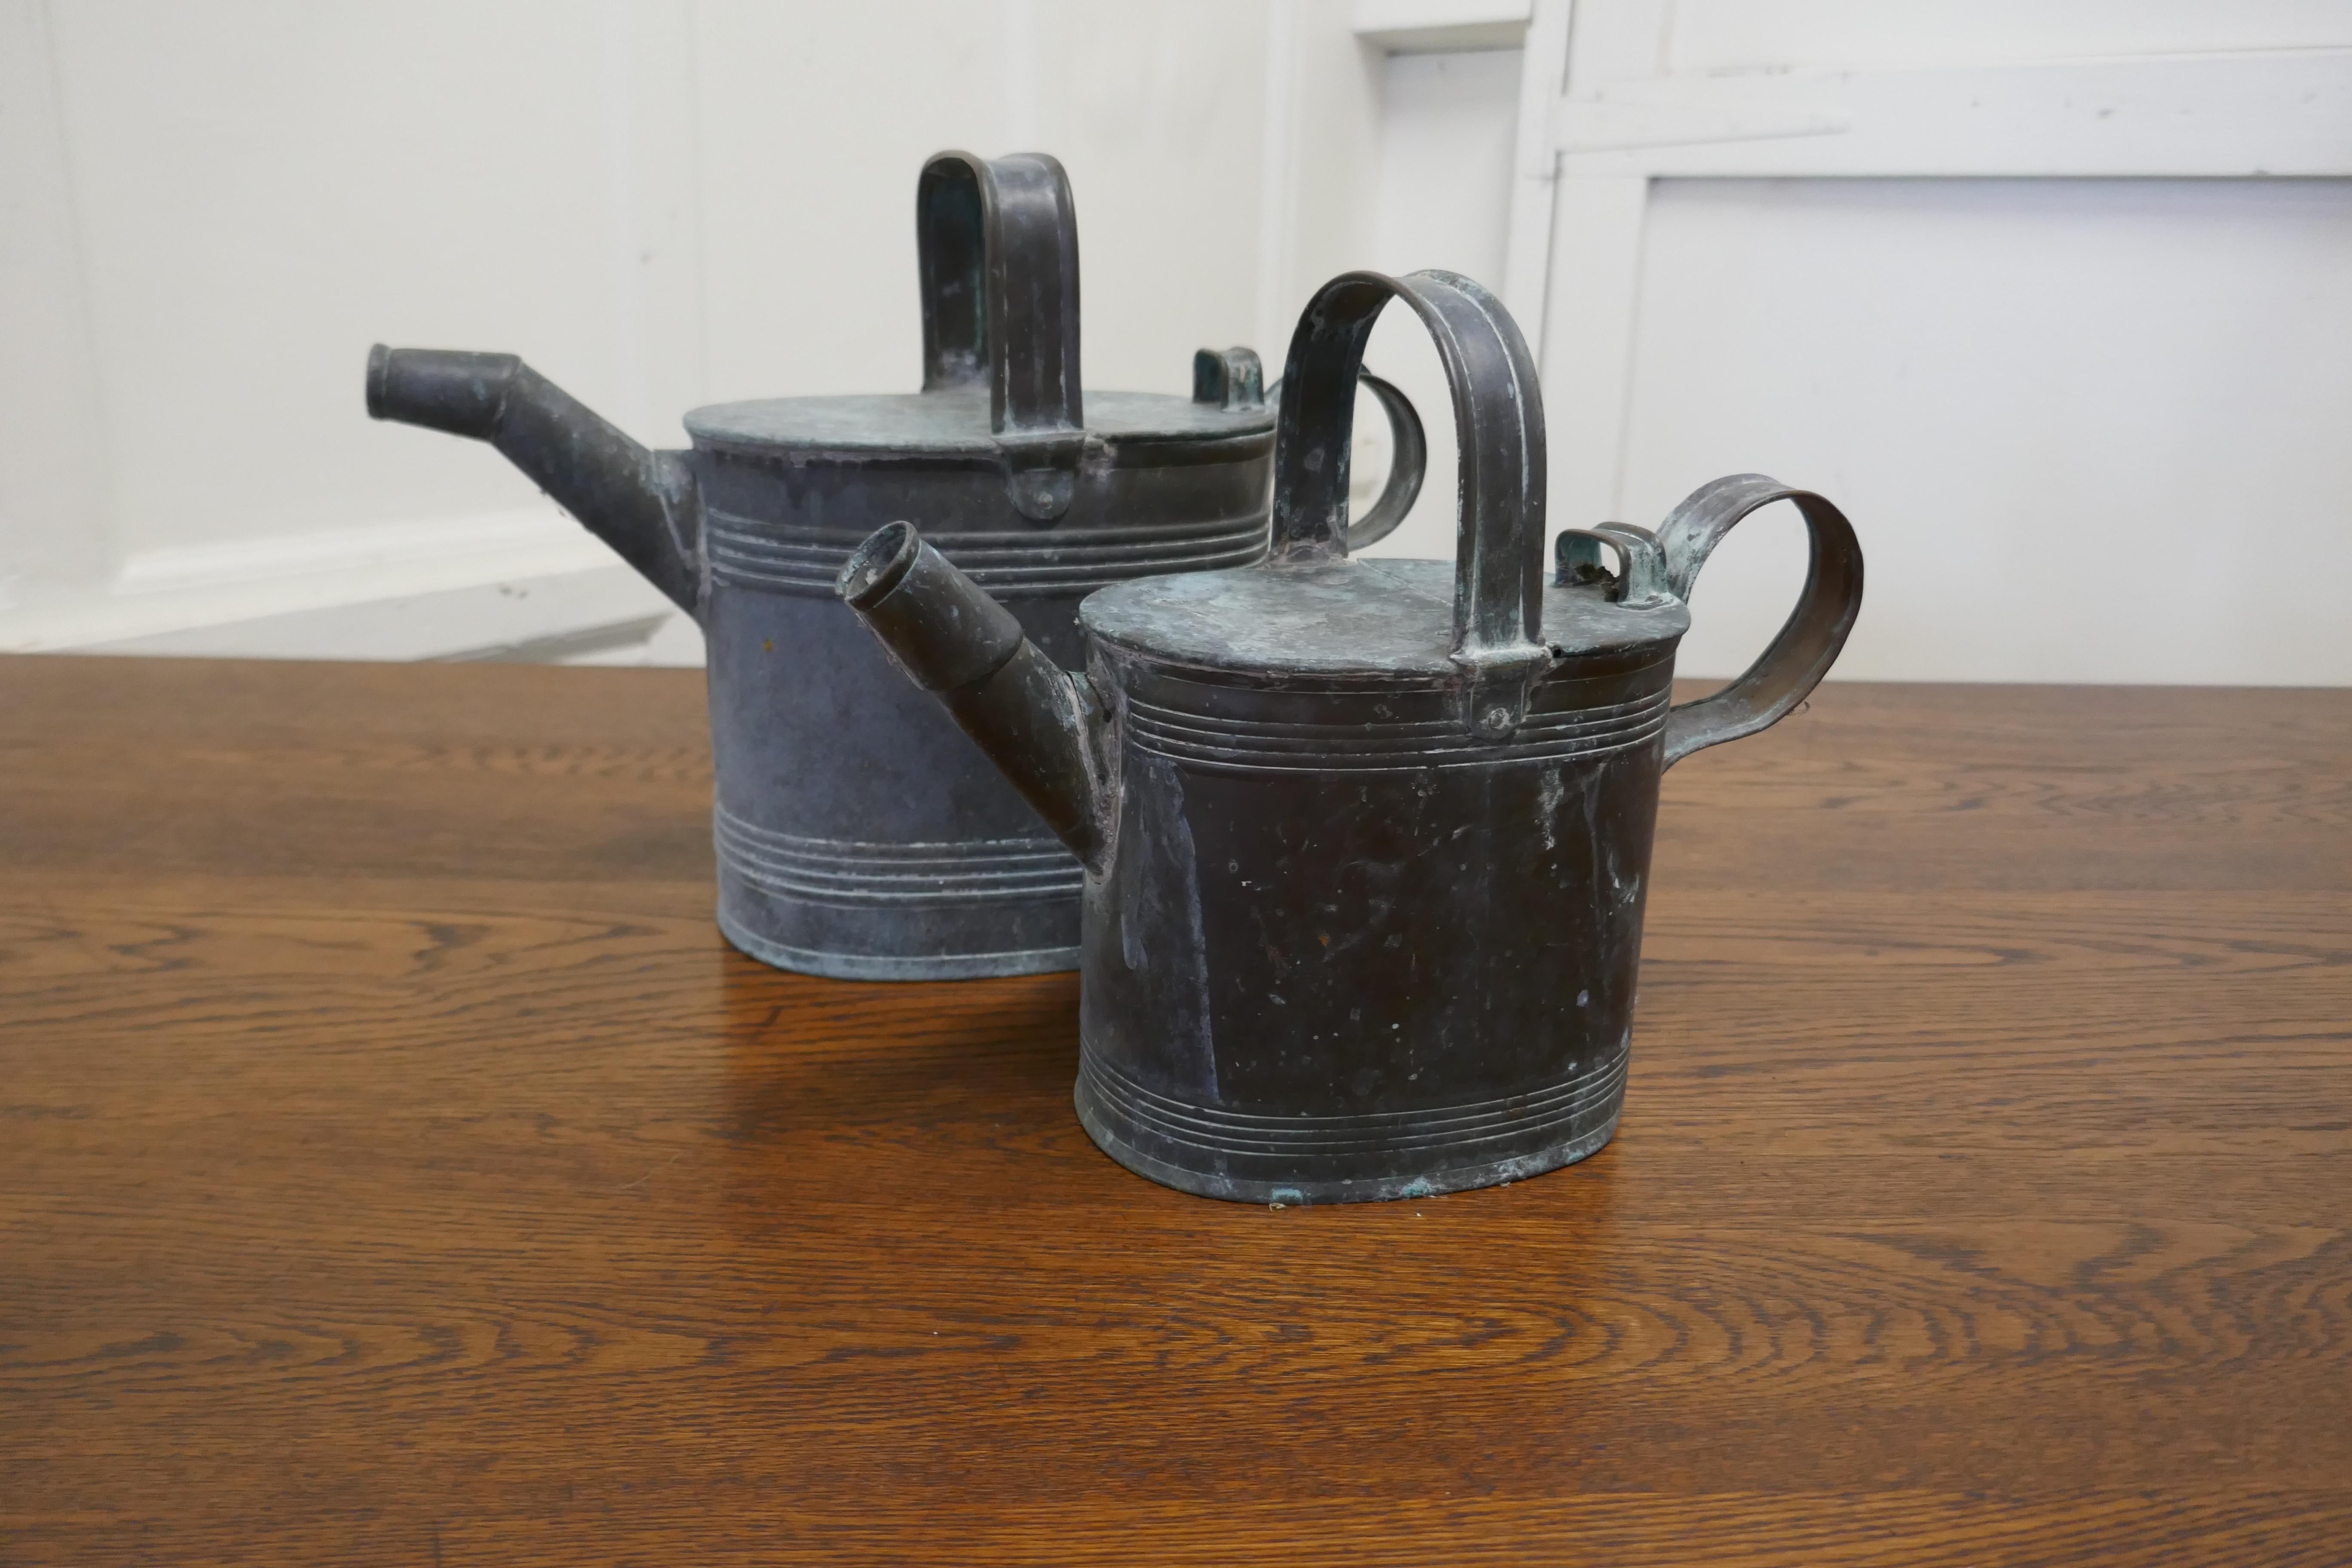 Set of 2 Victorian brass hot water jugs original verdigris

2 jugs or hot water cans, once the pride of the kitchen, now have been left in the condition which they were found un polished and with a natural verdigris patina, very attractive though